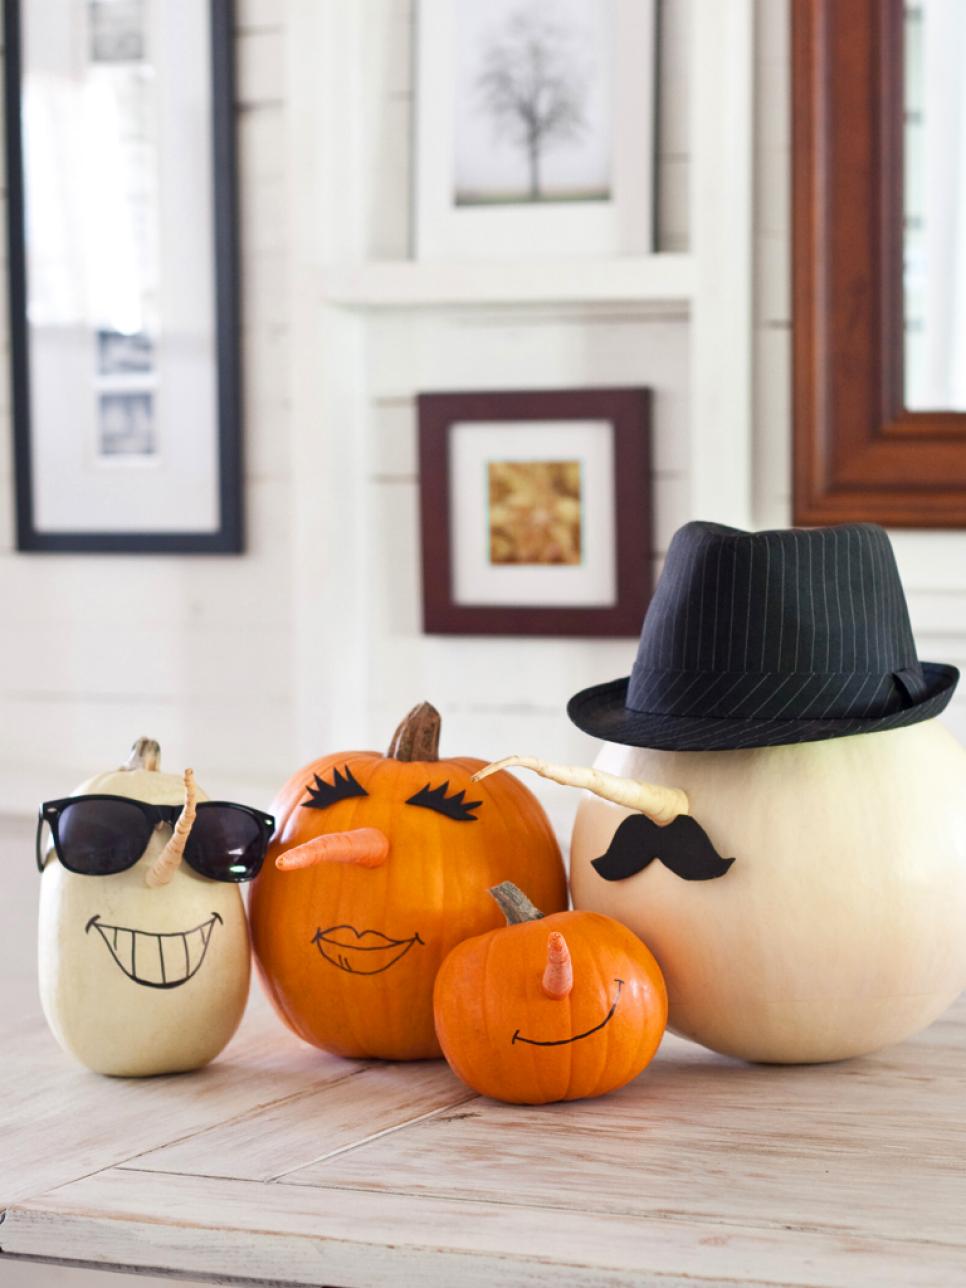 15 DECORATING IDEAS FOR HALLOWEEN